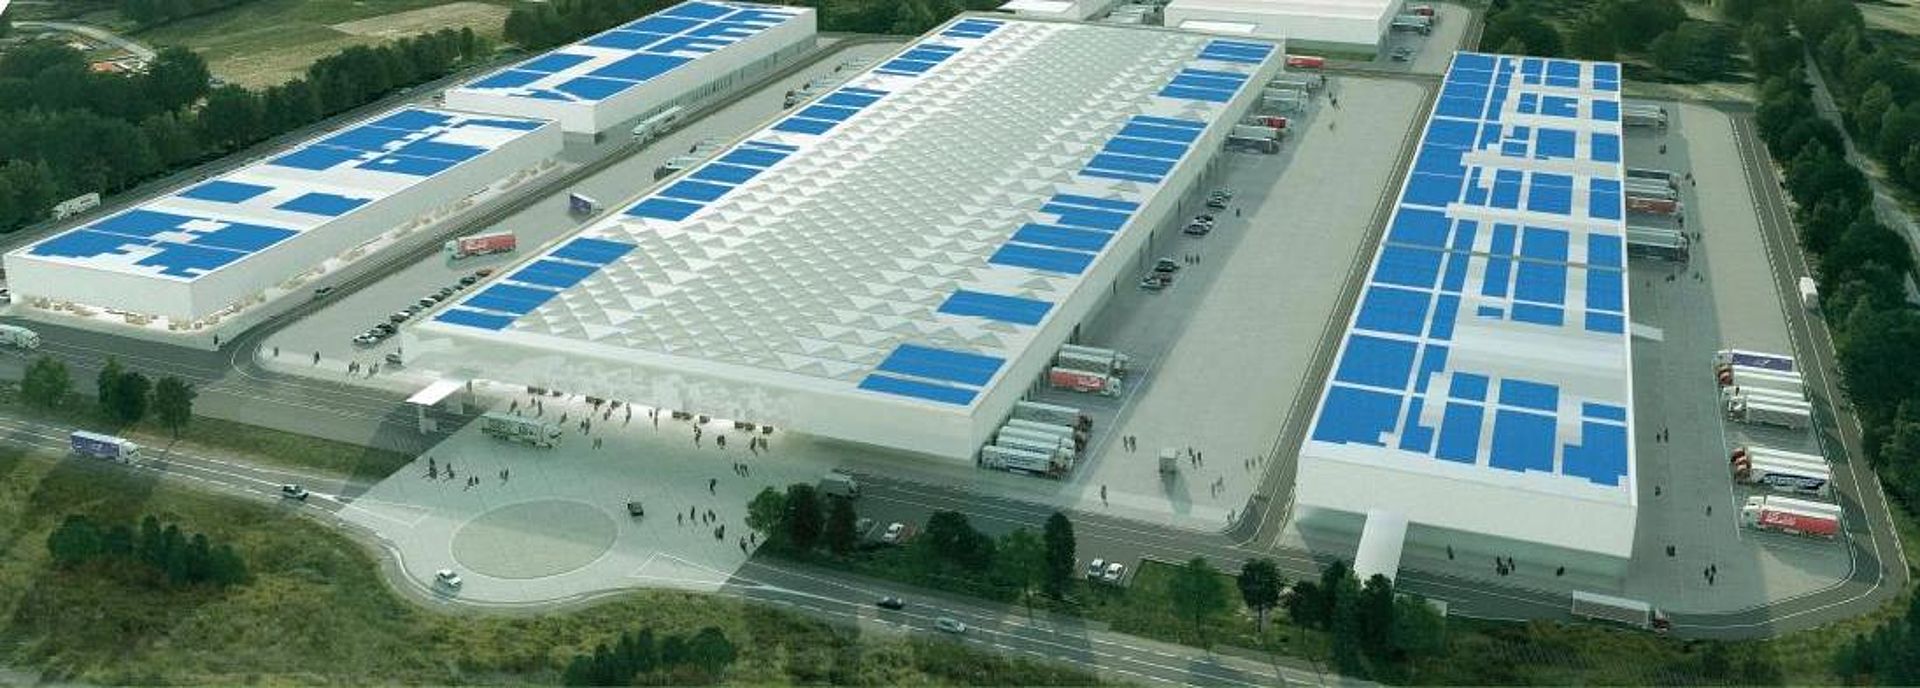 M.I.N industrial estate with PV panels on its roof 